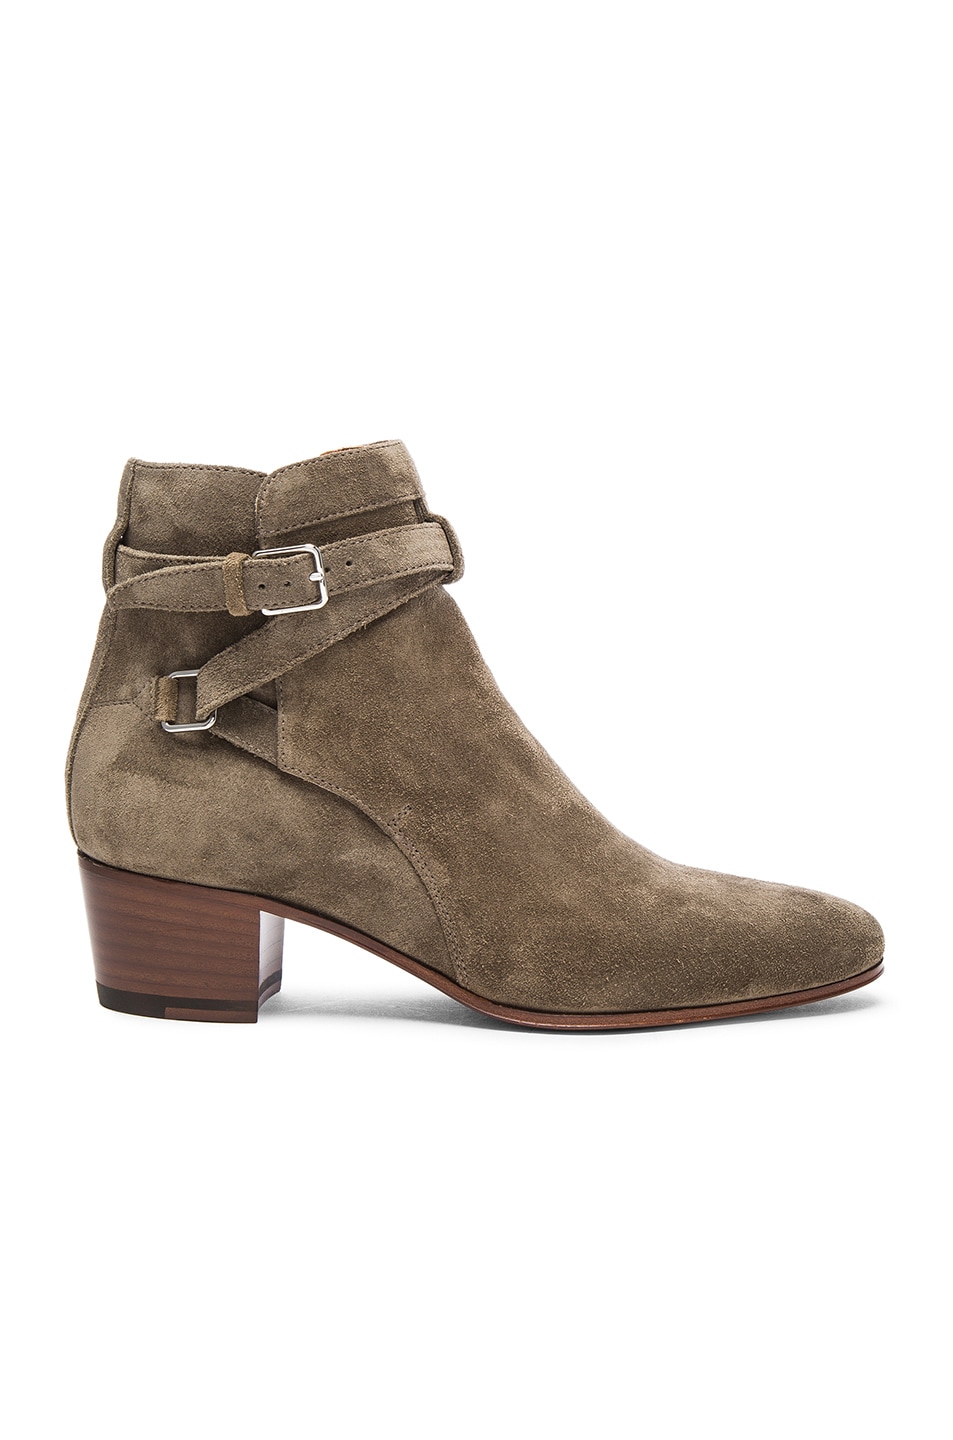 Image 1 of Saint Laurent Suede Blake Buckle Boots in Kaki Washed